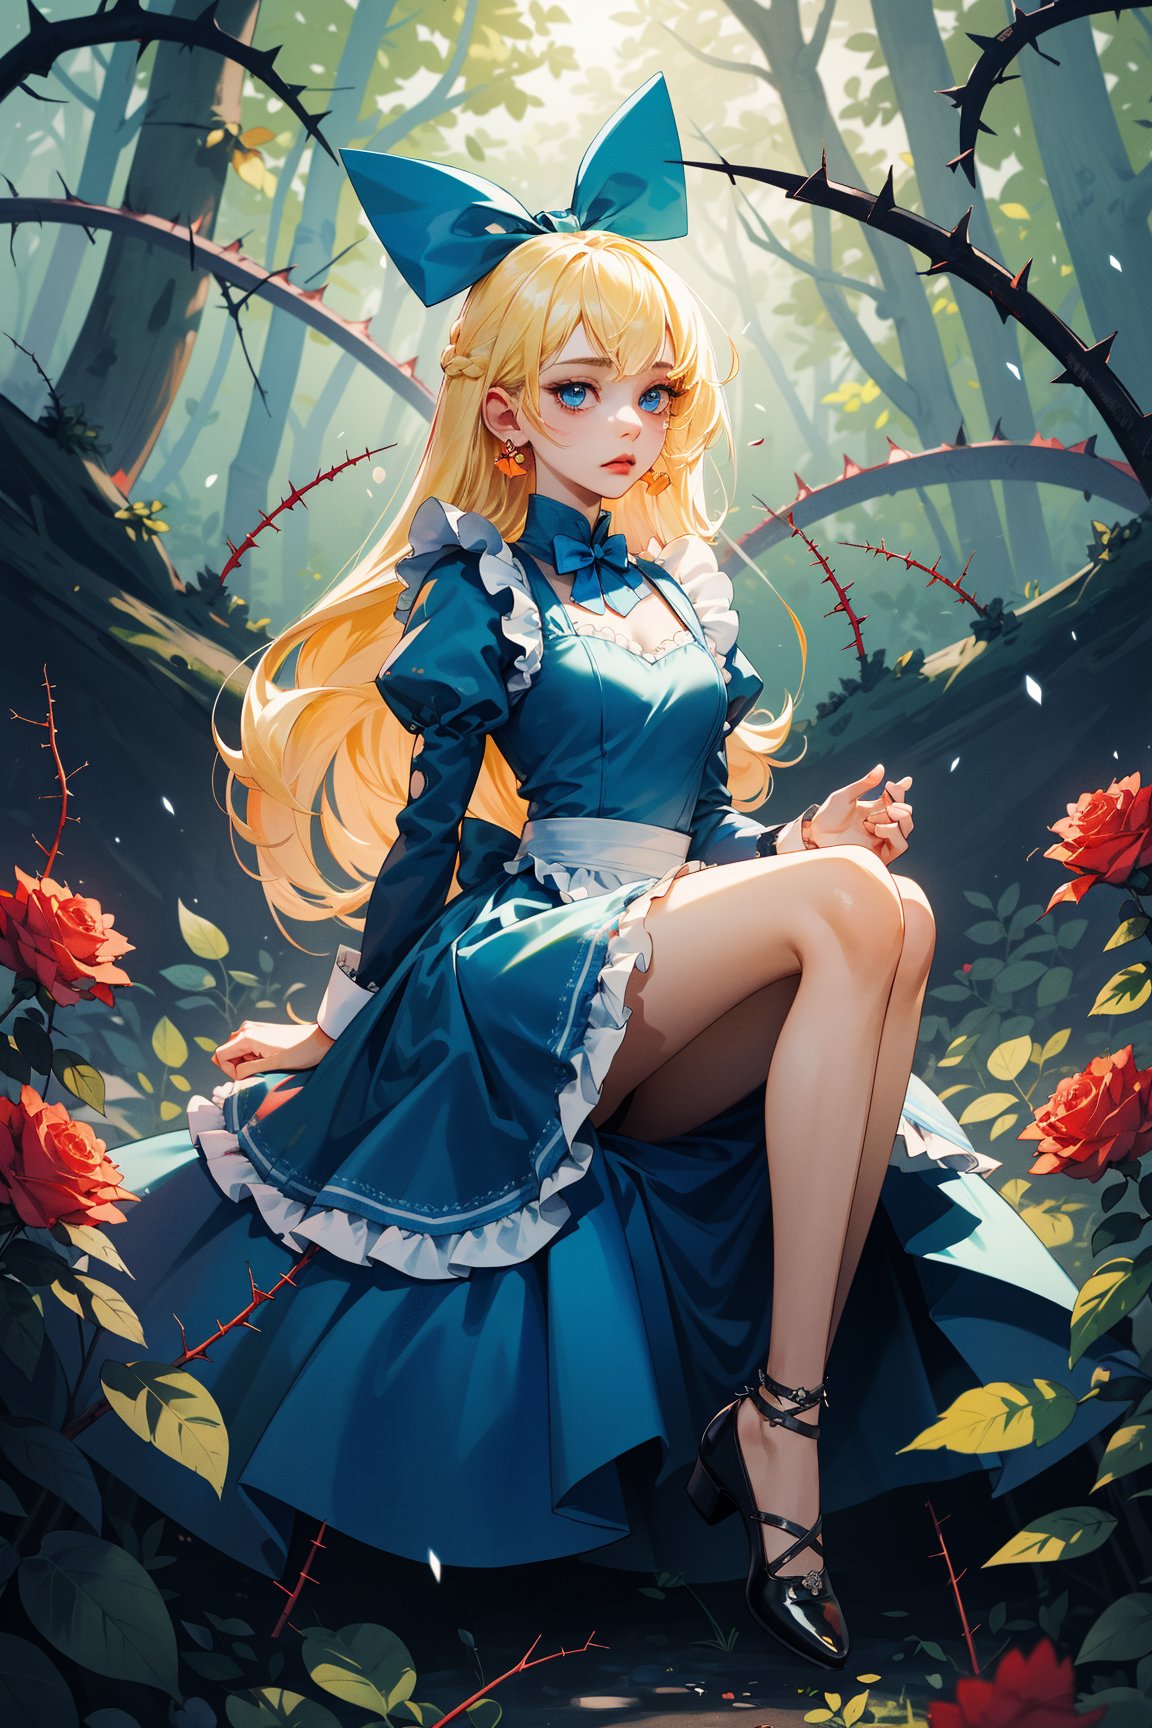 (masterpiece, best quality, highres:1.3), ultra resolution image, (1girl), (solo), light yellow hair, light blue eyes, AliceWonderland, blue bow on her head, black bows in her hair, blue maid's dress with black bows, blue shoes, very_long_hair, In the background a forest, strangled, tied and rolled with thorns of red roses, with painful and bleeding arms and legs, looking down, with a lost gaze, clothes torn by the thorns, clothes with blood from the wounds, stop, with her arms raised, torn dress, hurt, wounded, stopped, tangled with thorns of roses